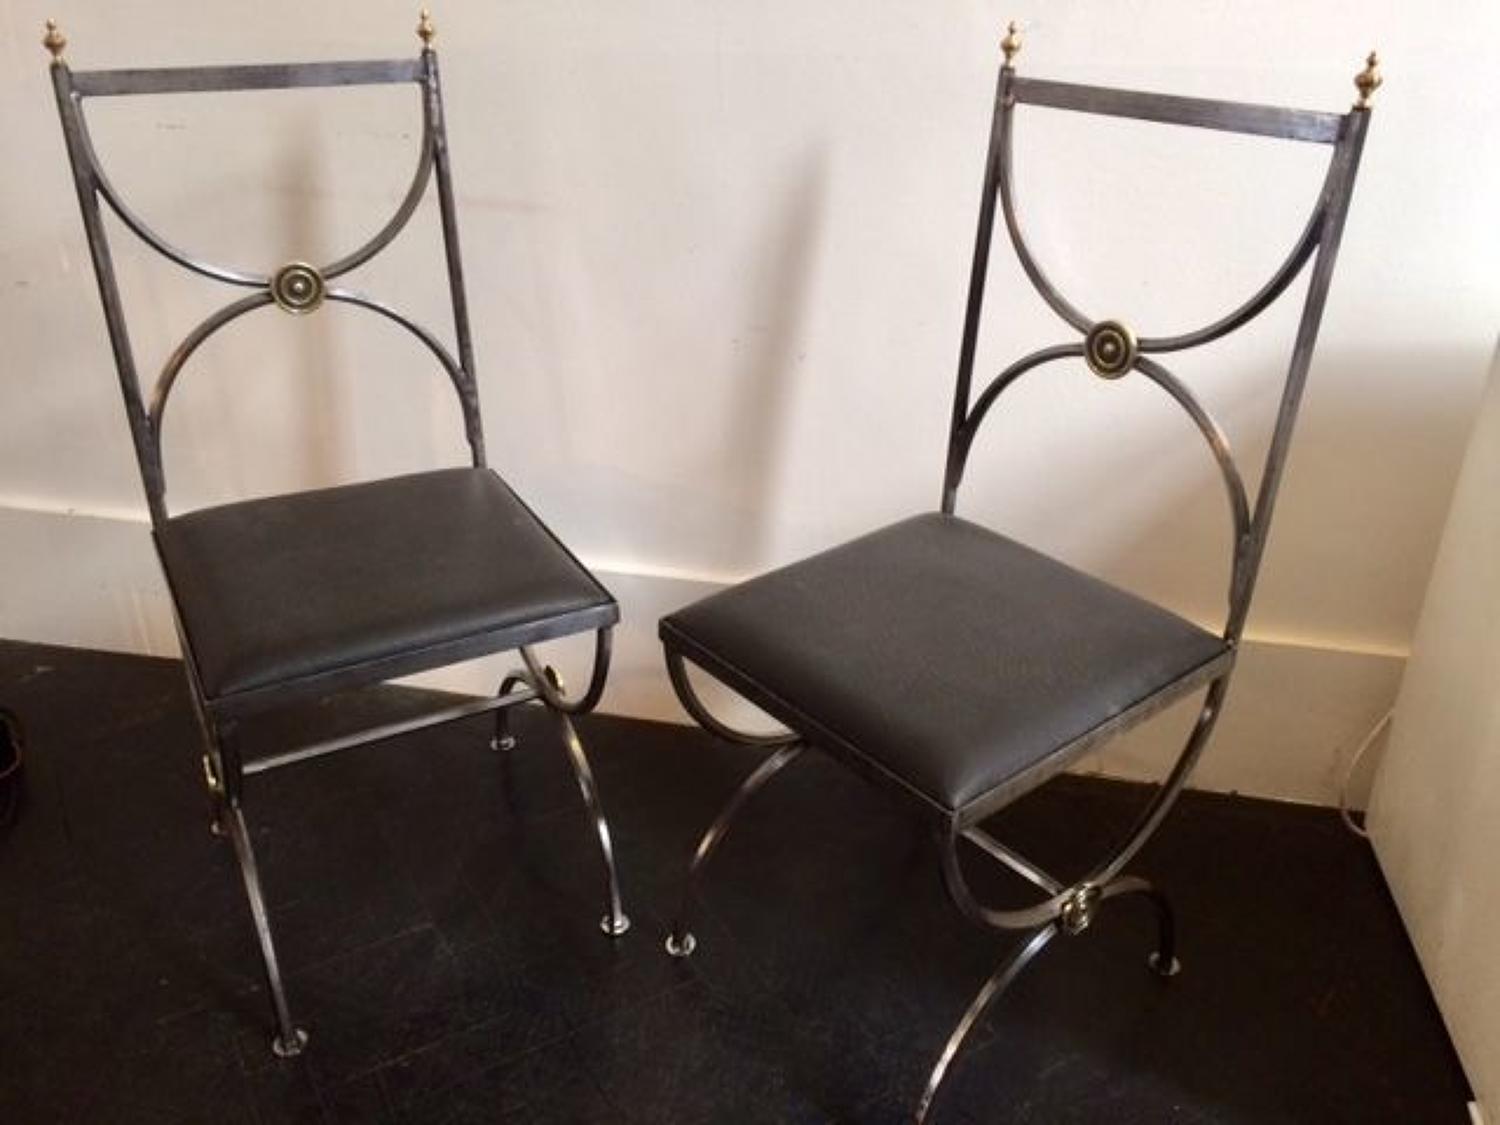 Pair of polished steel chairs